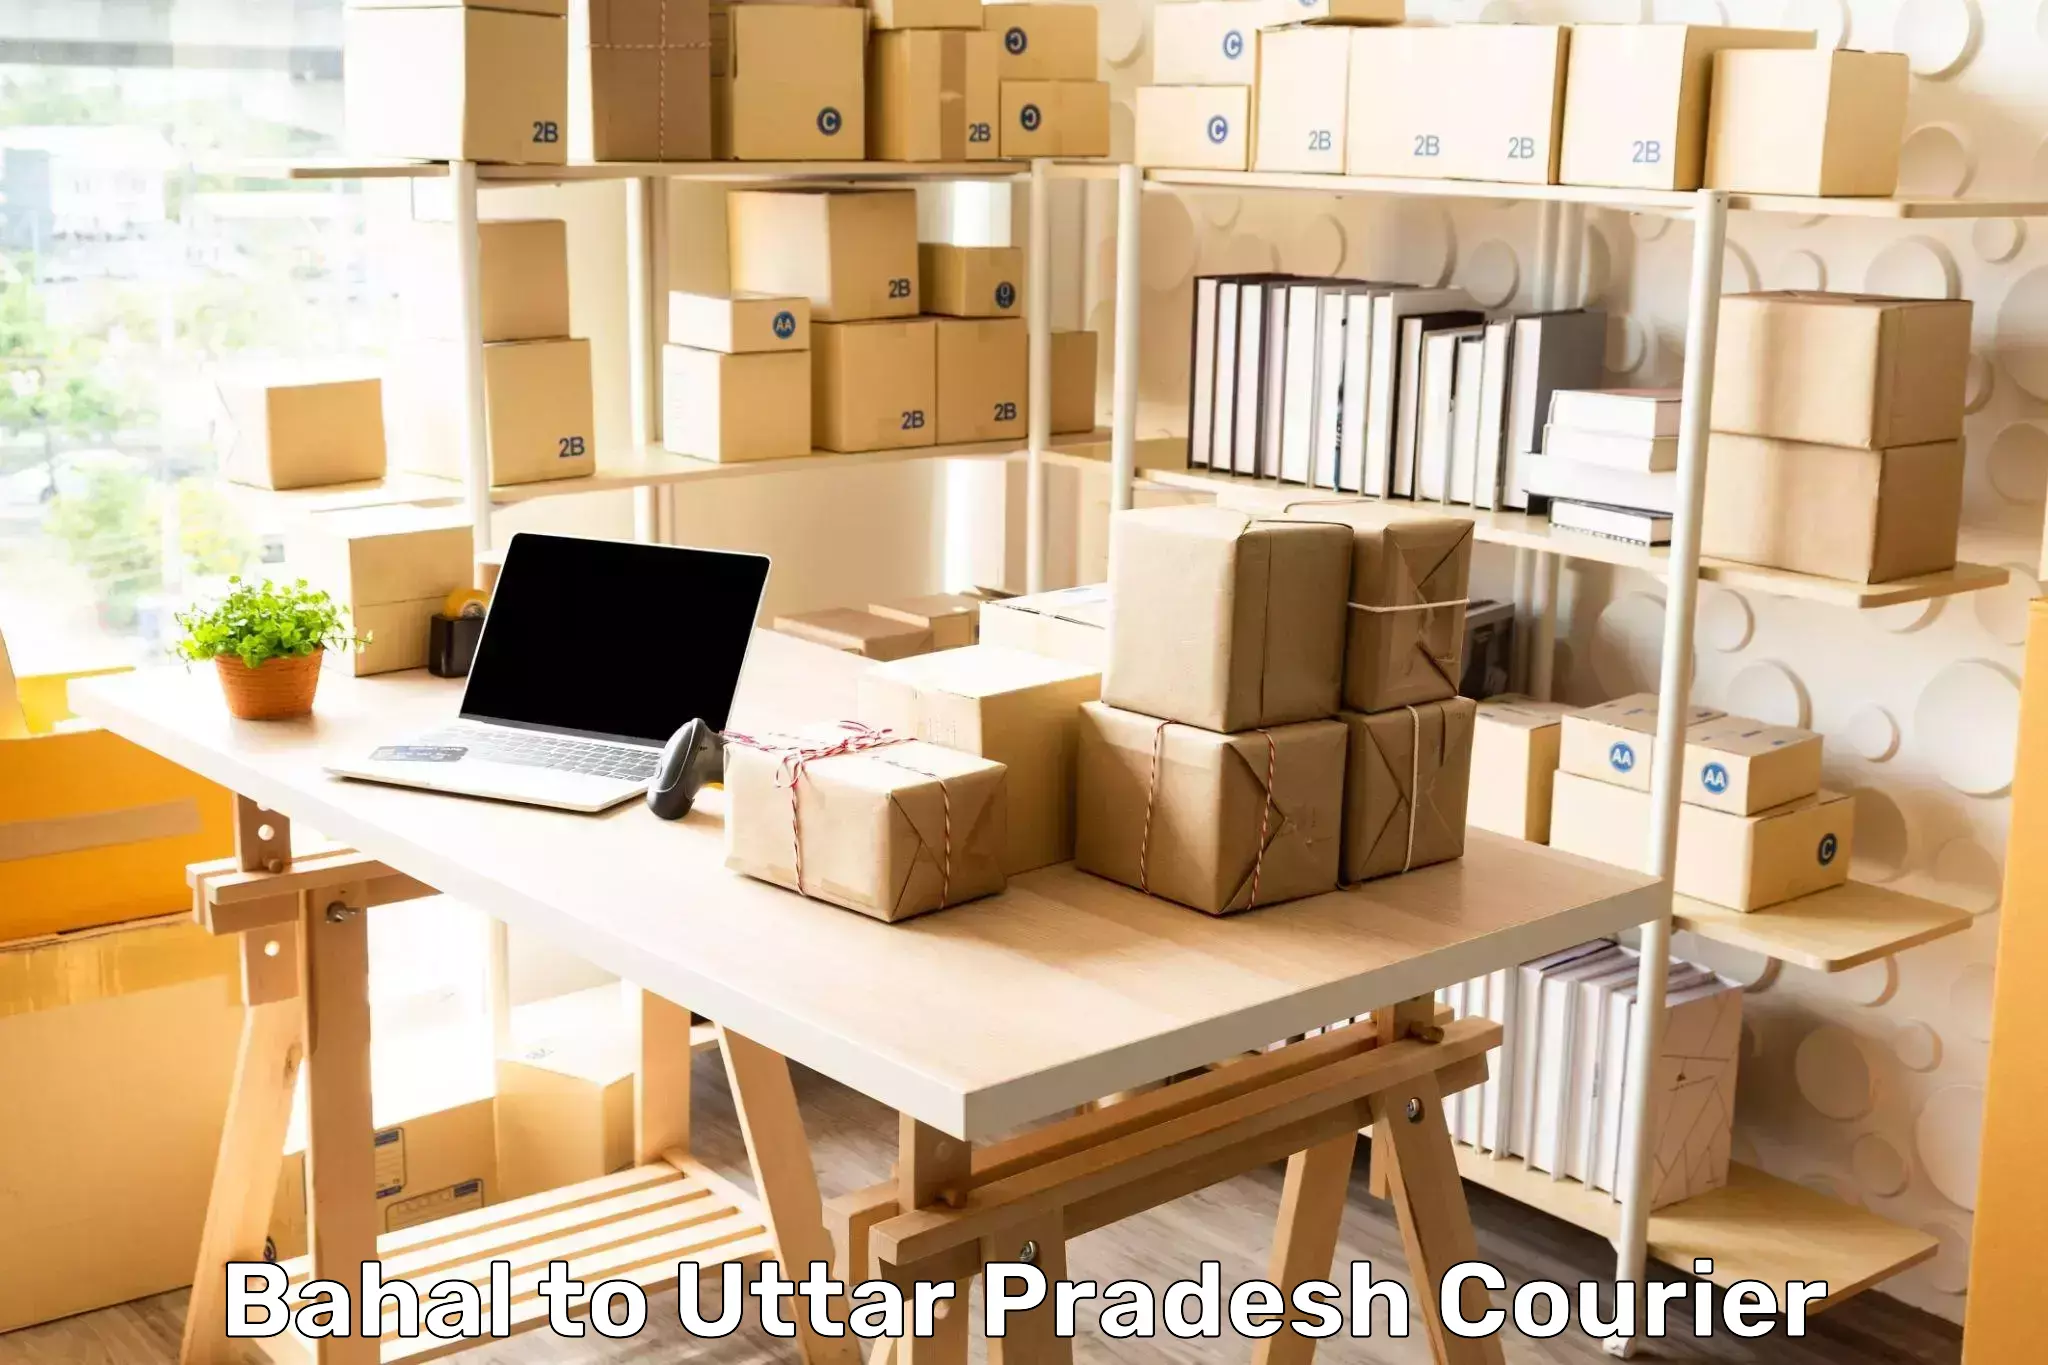 Customer-oriented courier services in Bahal to Uttar Pradesh